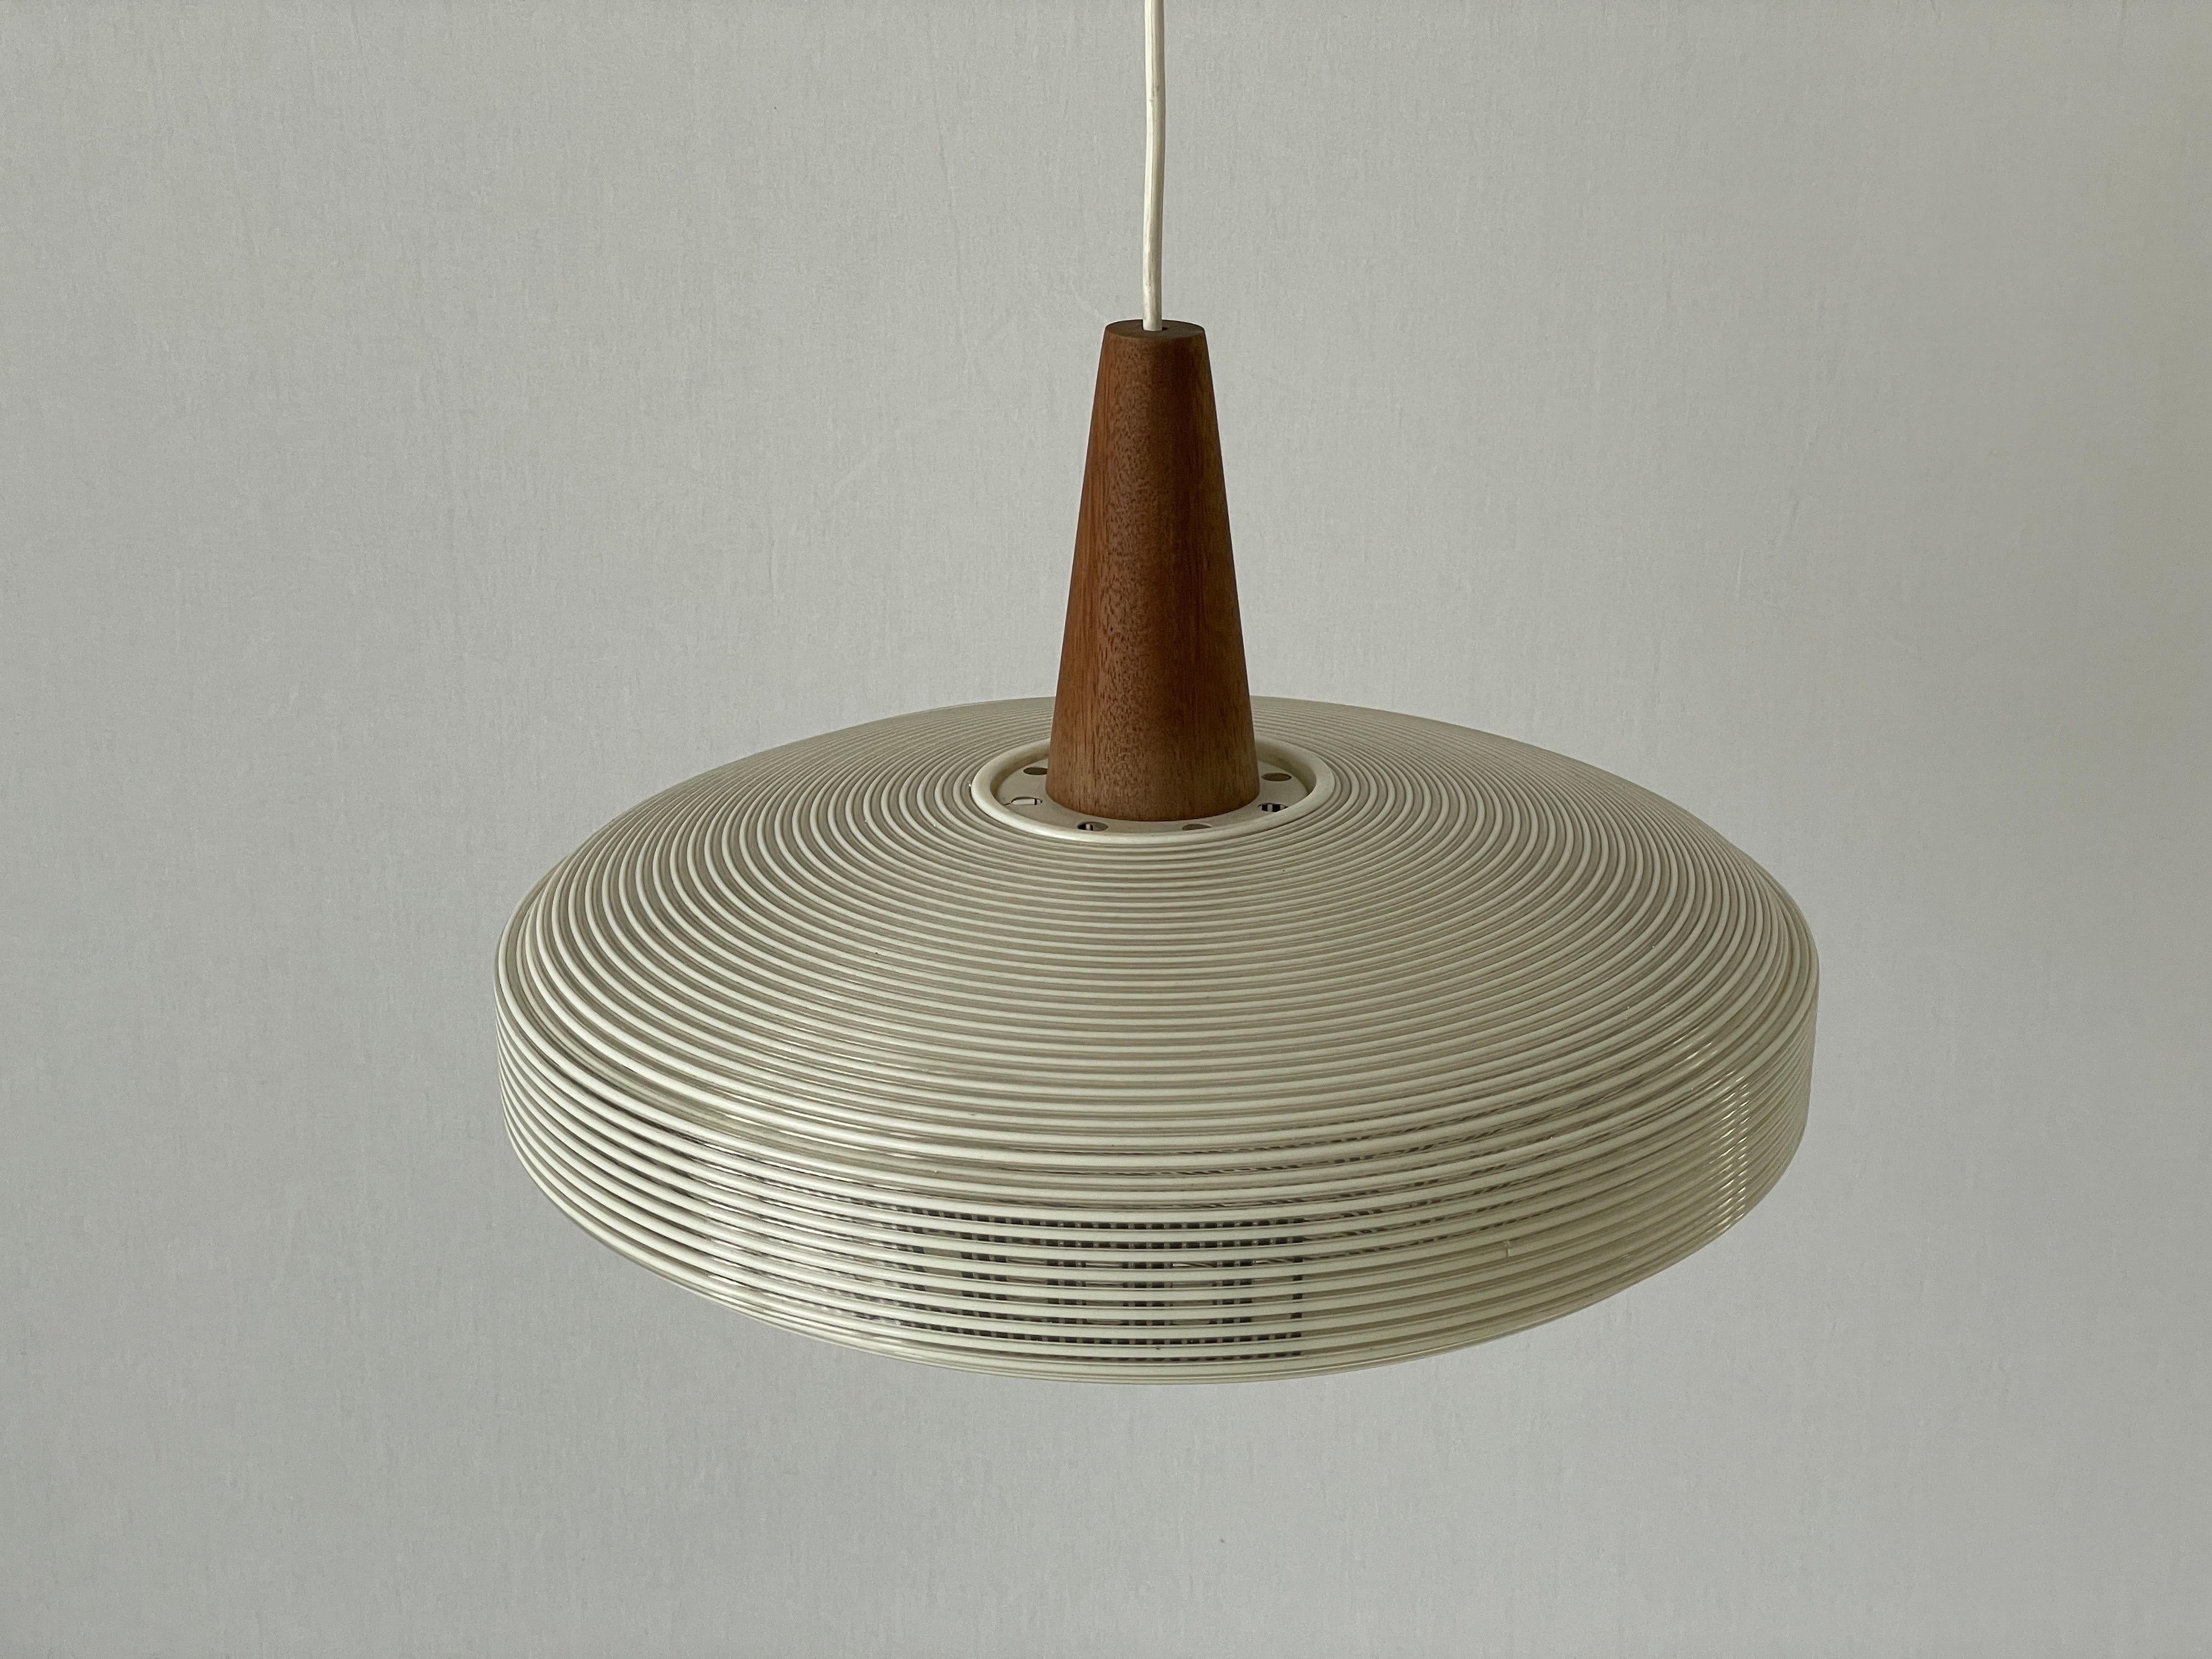 Rare Rotaflex Ceiling Lamp by Yasha Heifetz with Teak Detail, 1960s Germany

Elegant and minimal design hanging lamp

Teak parts and Abs plastic (rotaflex) lampshade
Lampshade is in good condition and very clean. 
This lamp works with E27 light